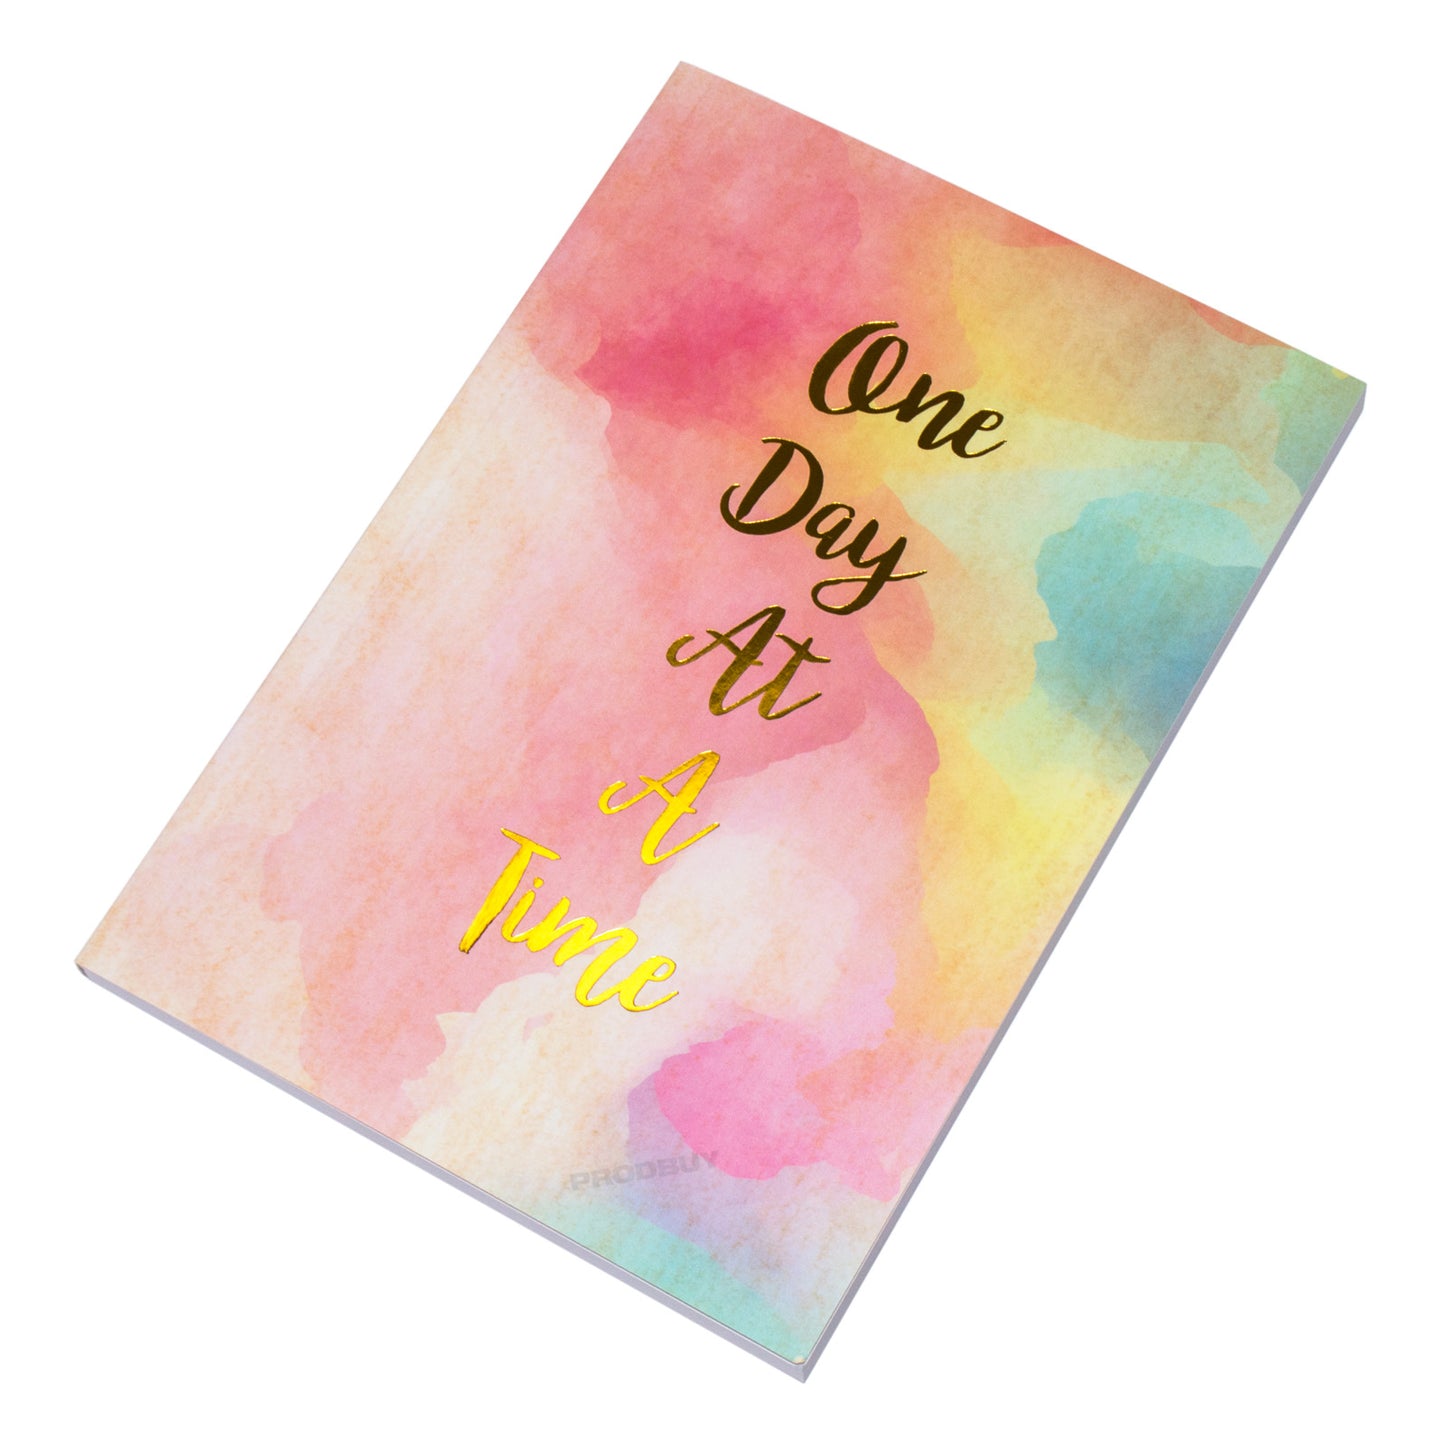 'One Day At A Time' A5 Lined Journal All Year Monthly Diary Notebook